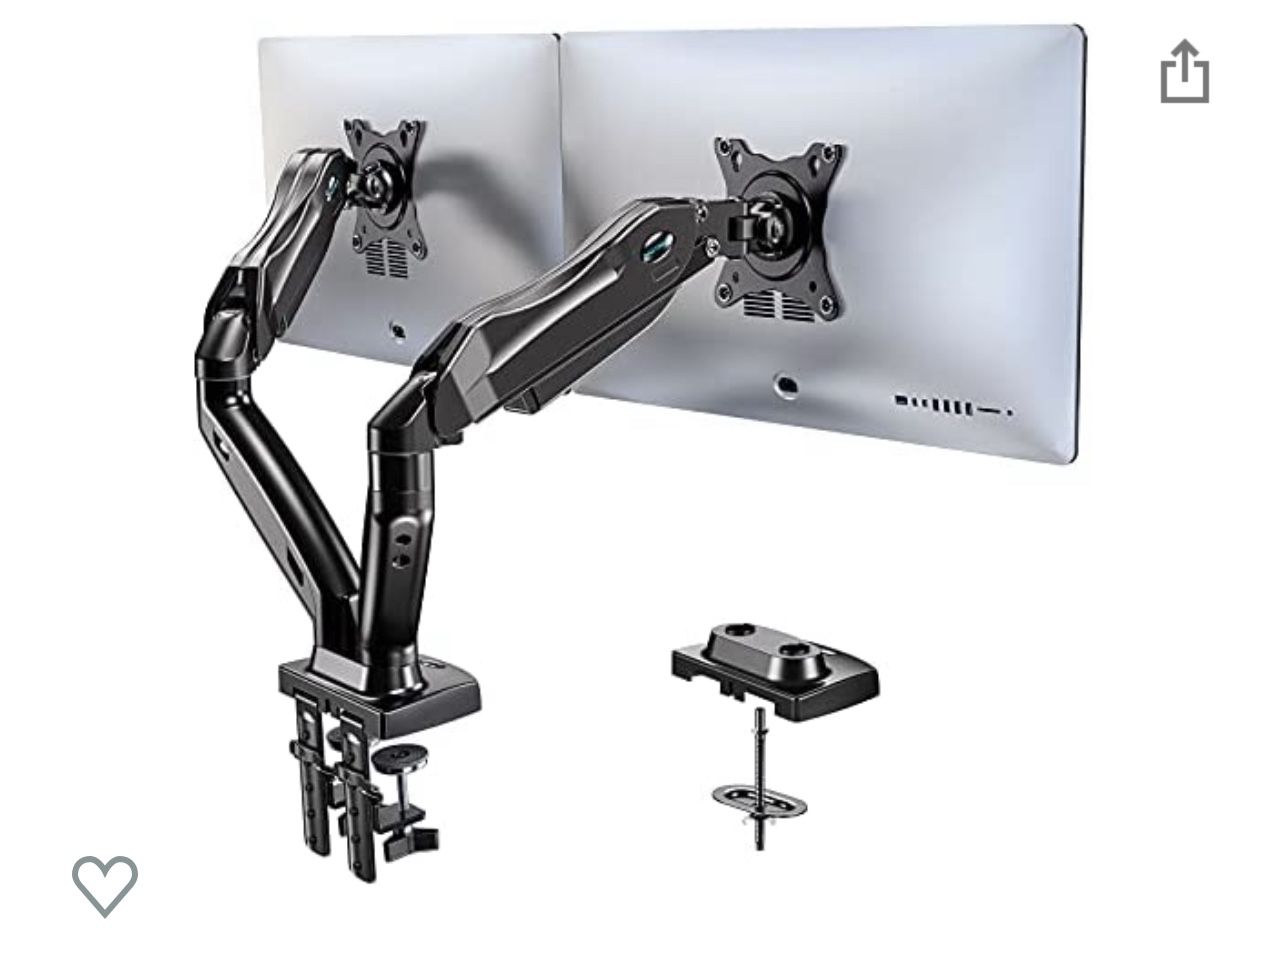 HUANUO Dual Monitor Stand, Adjustable Spring Monitor Desk Mount Swivel Vesa Bracket with C Clamp/Grommet Mounting Base for 17 to 27 Inch Computer Scre